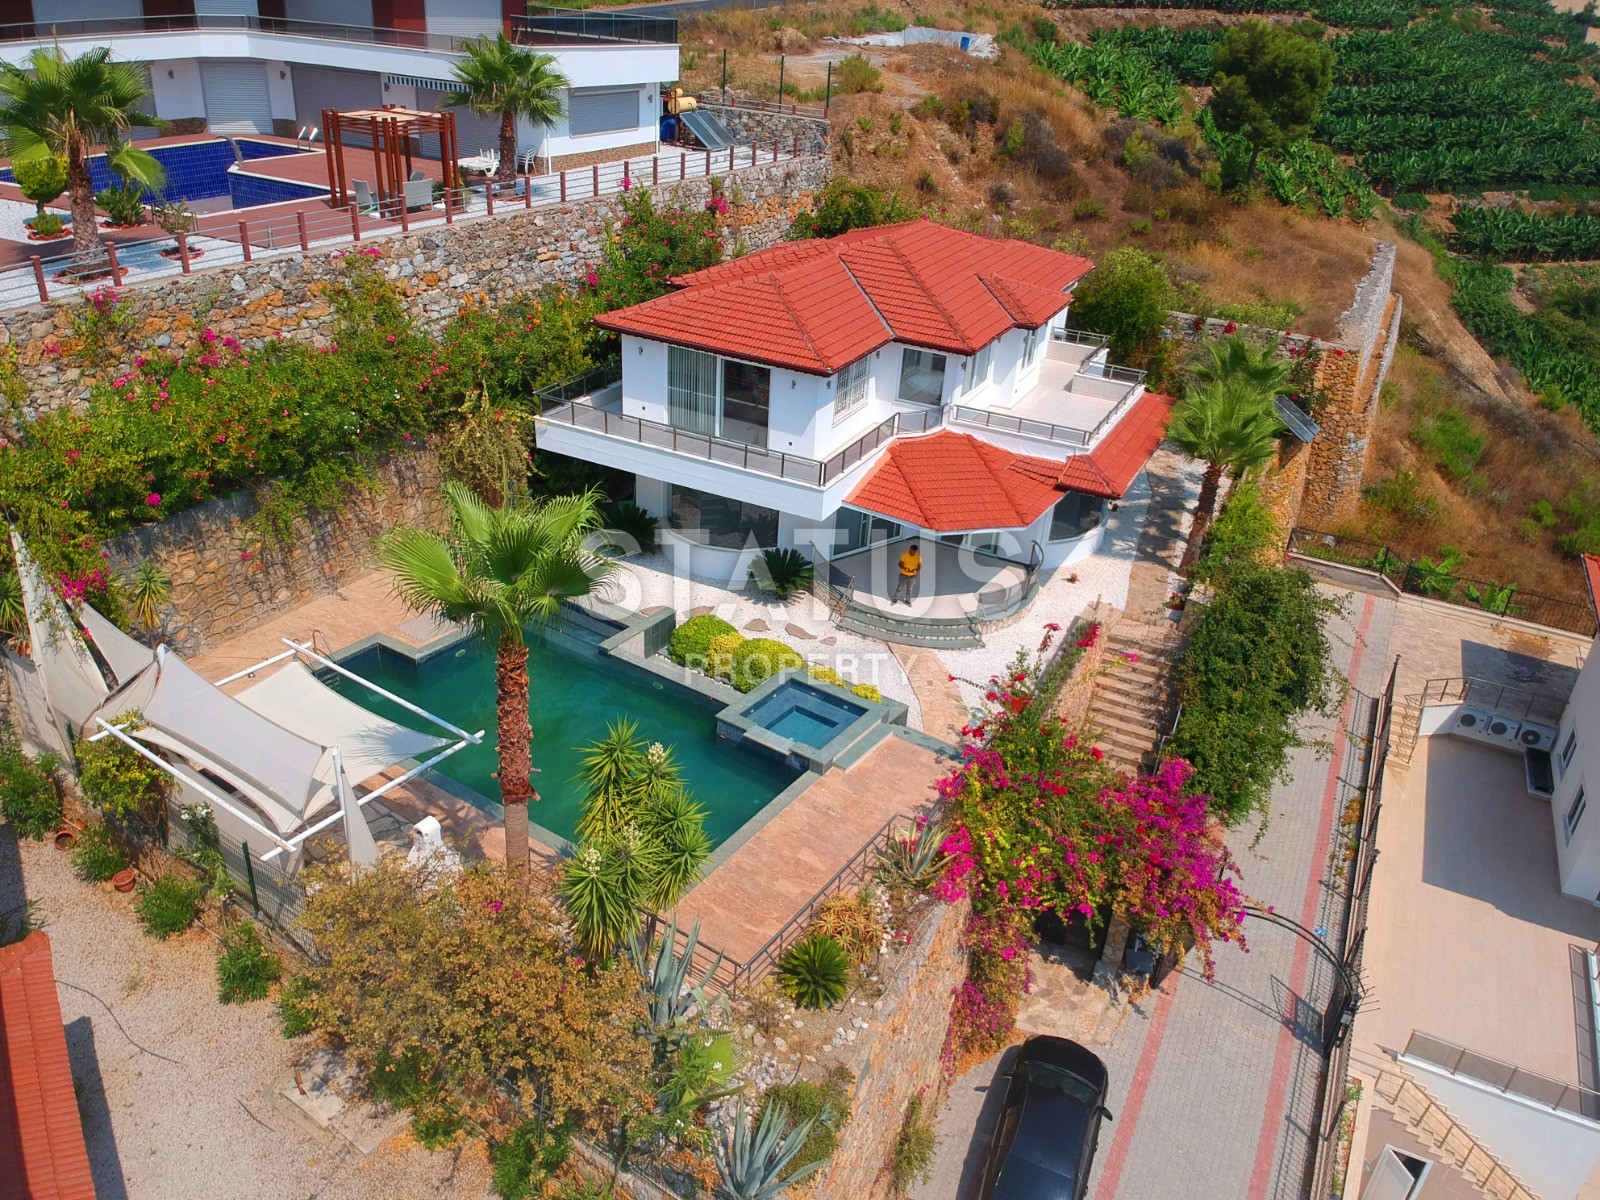 Villa 3+1 with a private pool in the Kargicak area, 600 m2 фото 1